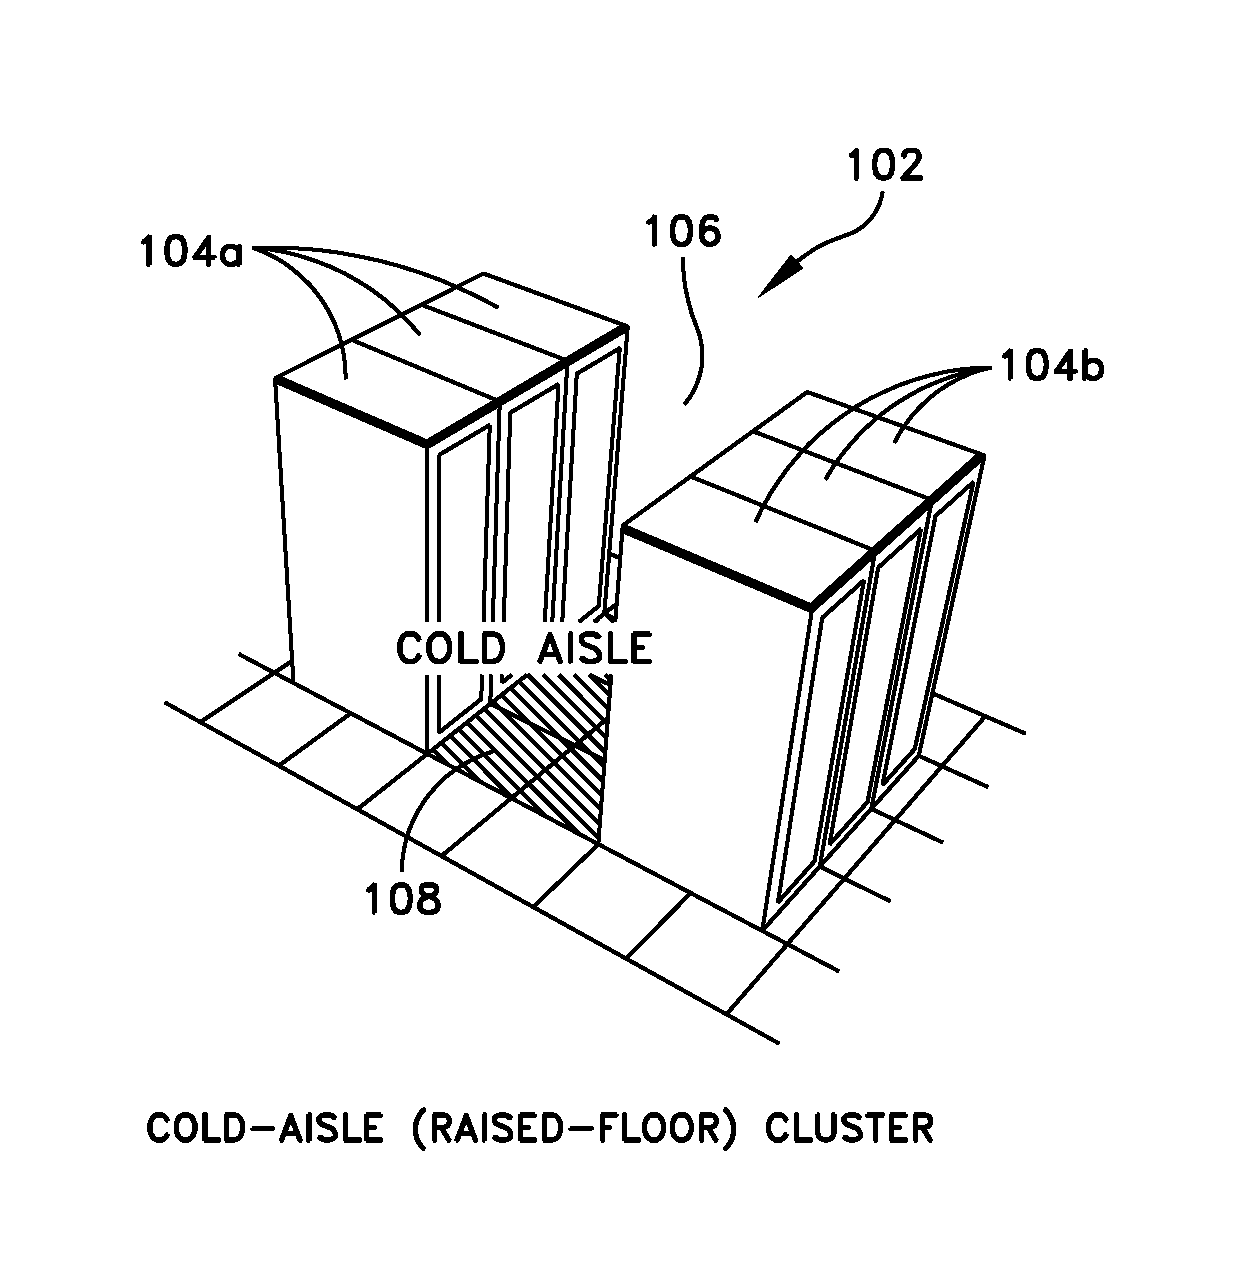 System and method for evaluating equipment rack cooling performance